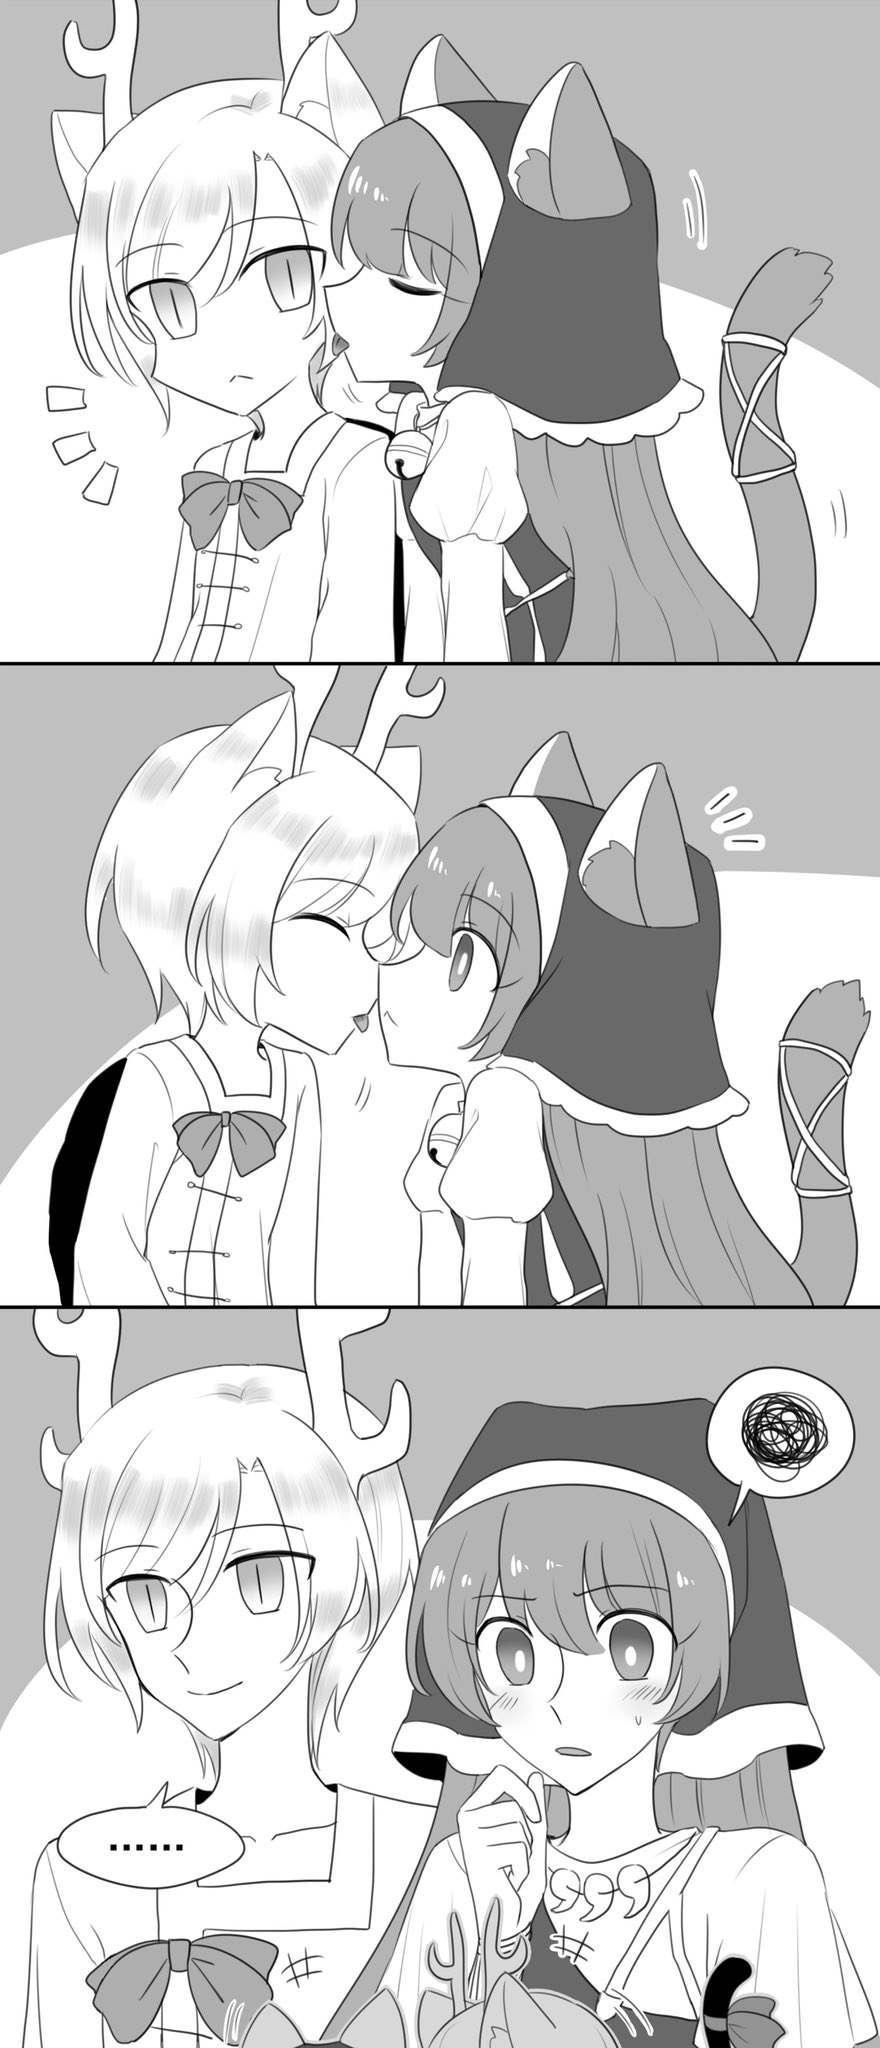 ... 2girls animal_ears antlers apron bell blush bow cat_ears cat_tail greyscale haniyasushin_keiki head_scarf highres jewelry jingle_bell kicchou_yachie licking licking_another's_cheek licking_another's_face long_hair magatama magatama_necklace mask_(boring_mask) monochrome multiple_girls necklace short_hair slit_pupils smile surprised tail tail_bow tail_ornament touhou turtle_shell yuri